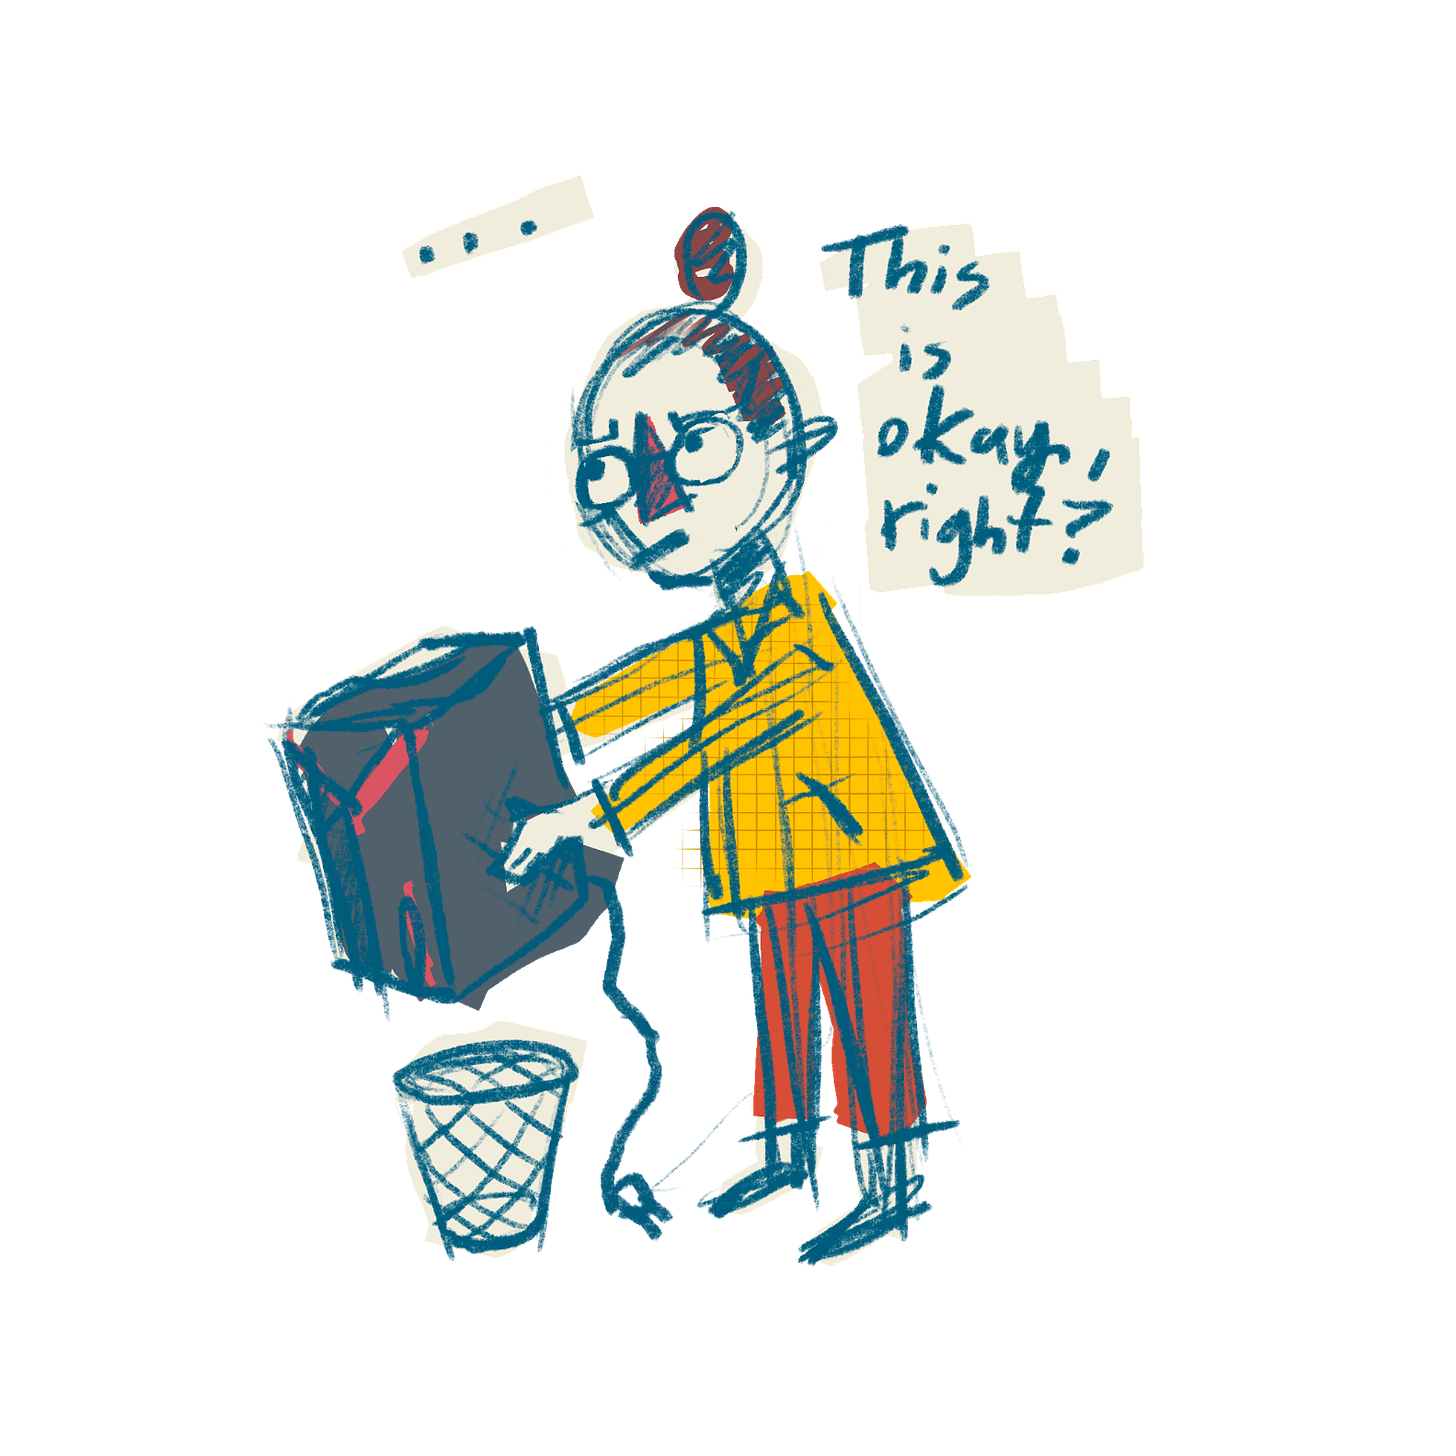 An illustration of me holding my computer over a garbage can, asking "this is okay, right?" I look like I know that it isn't. I have a cute yellow shirt on.